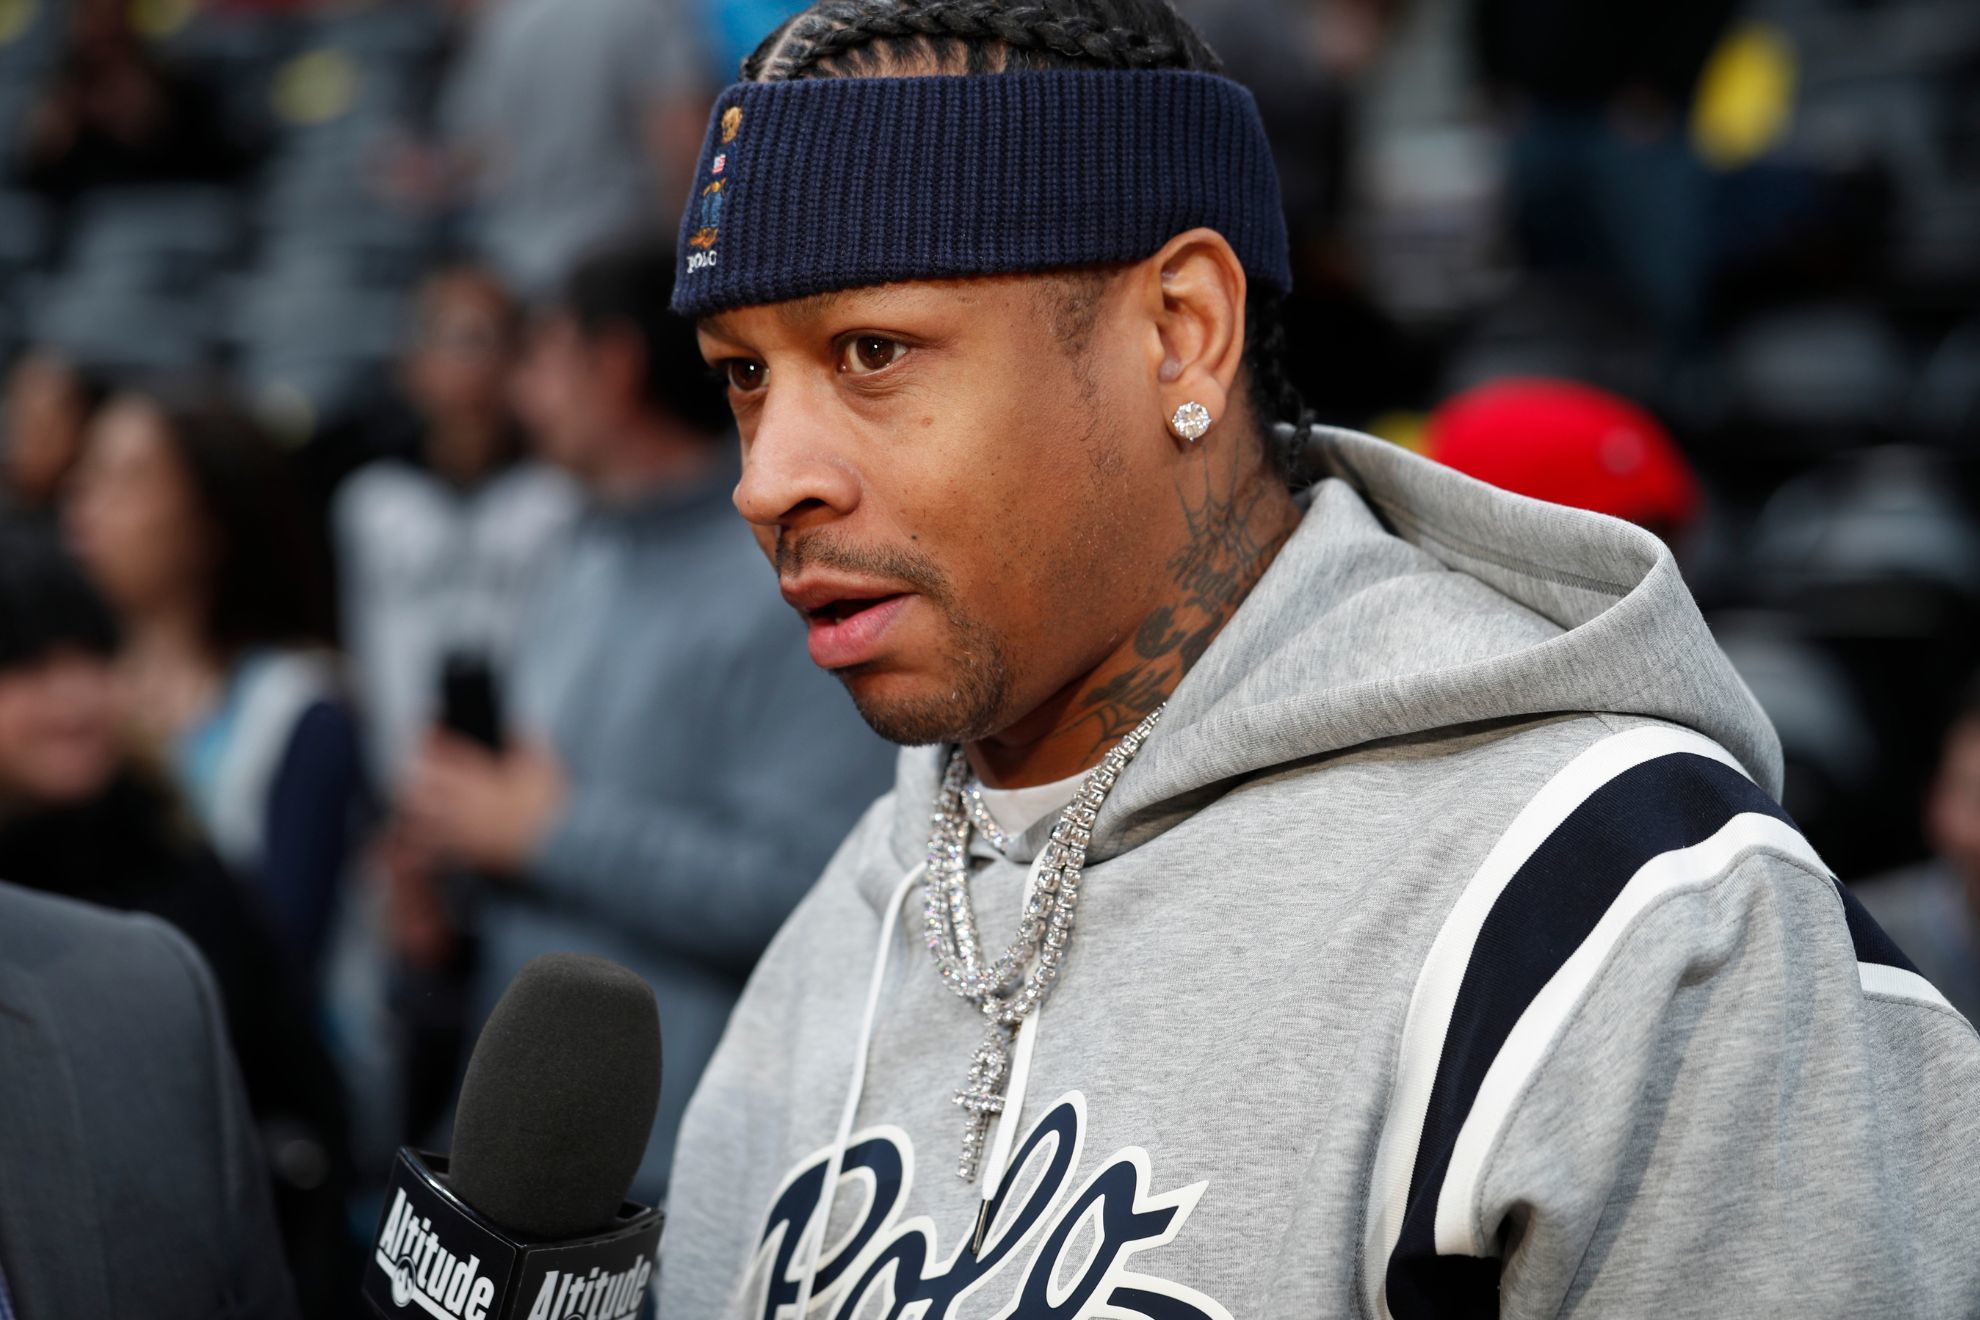 Allen Iverson wishes he could take back his infamous rant about practice